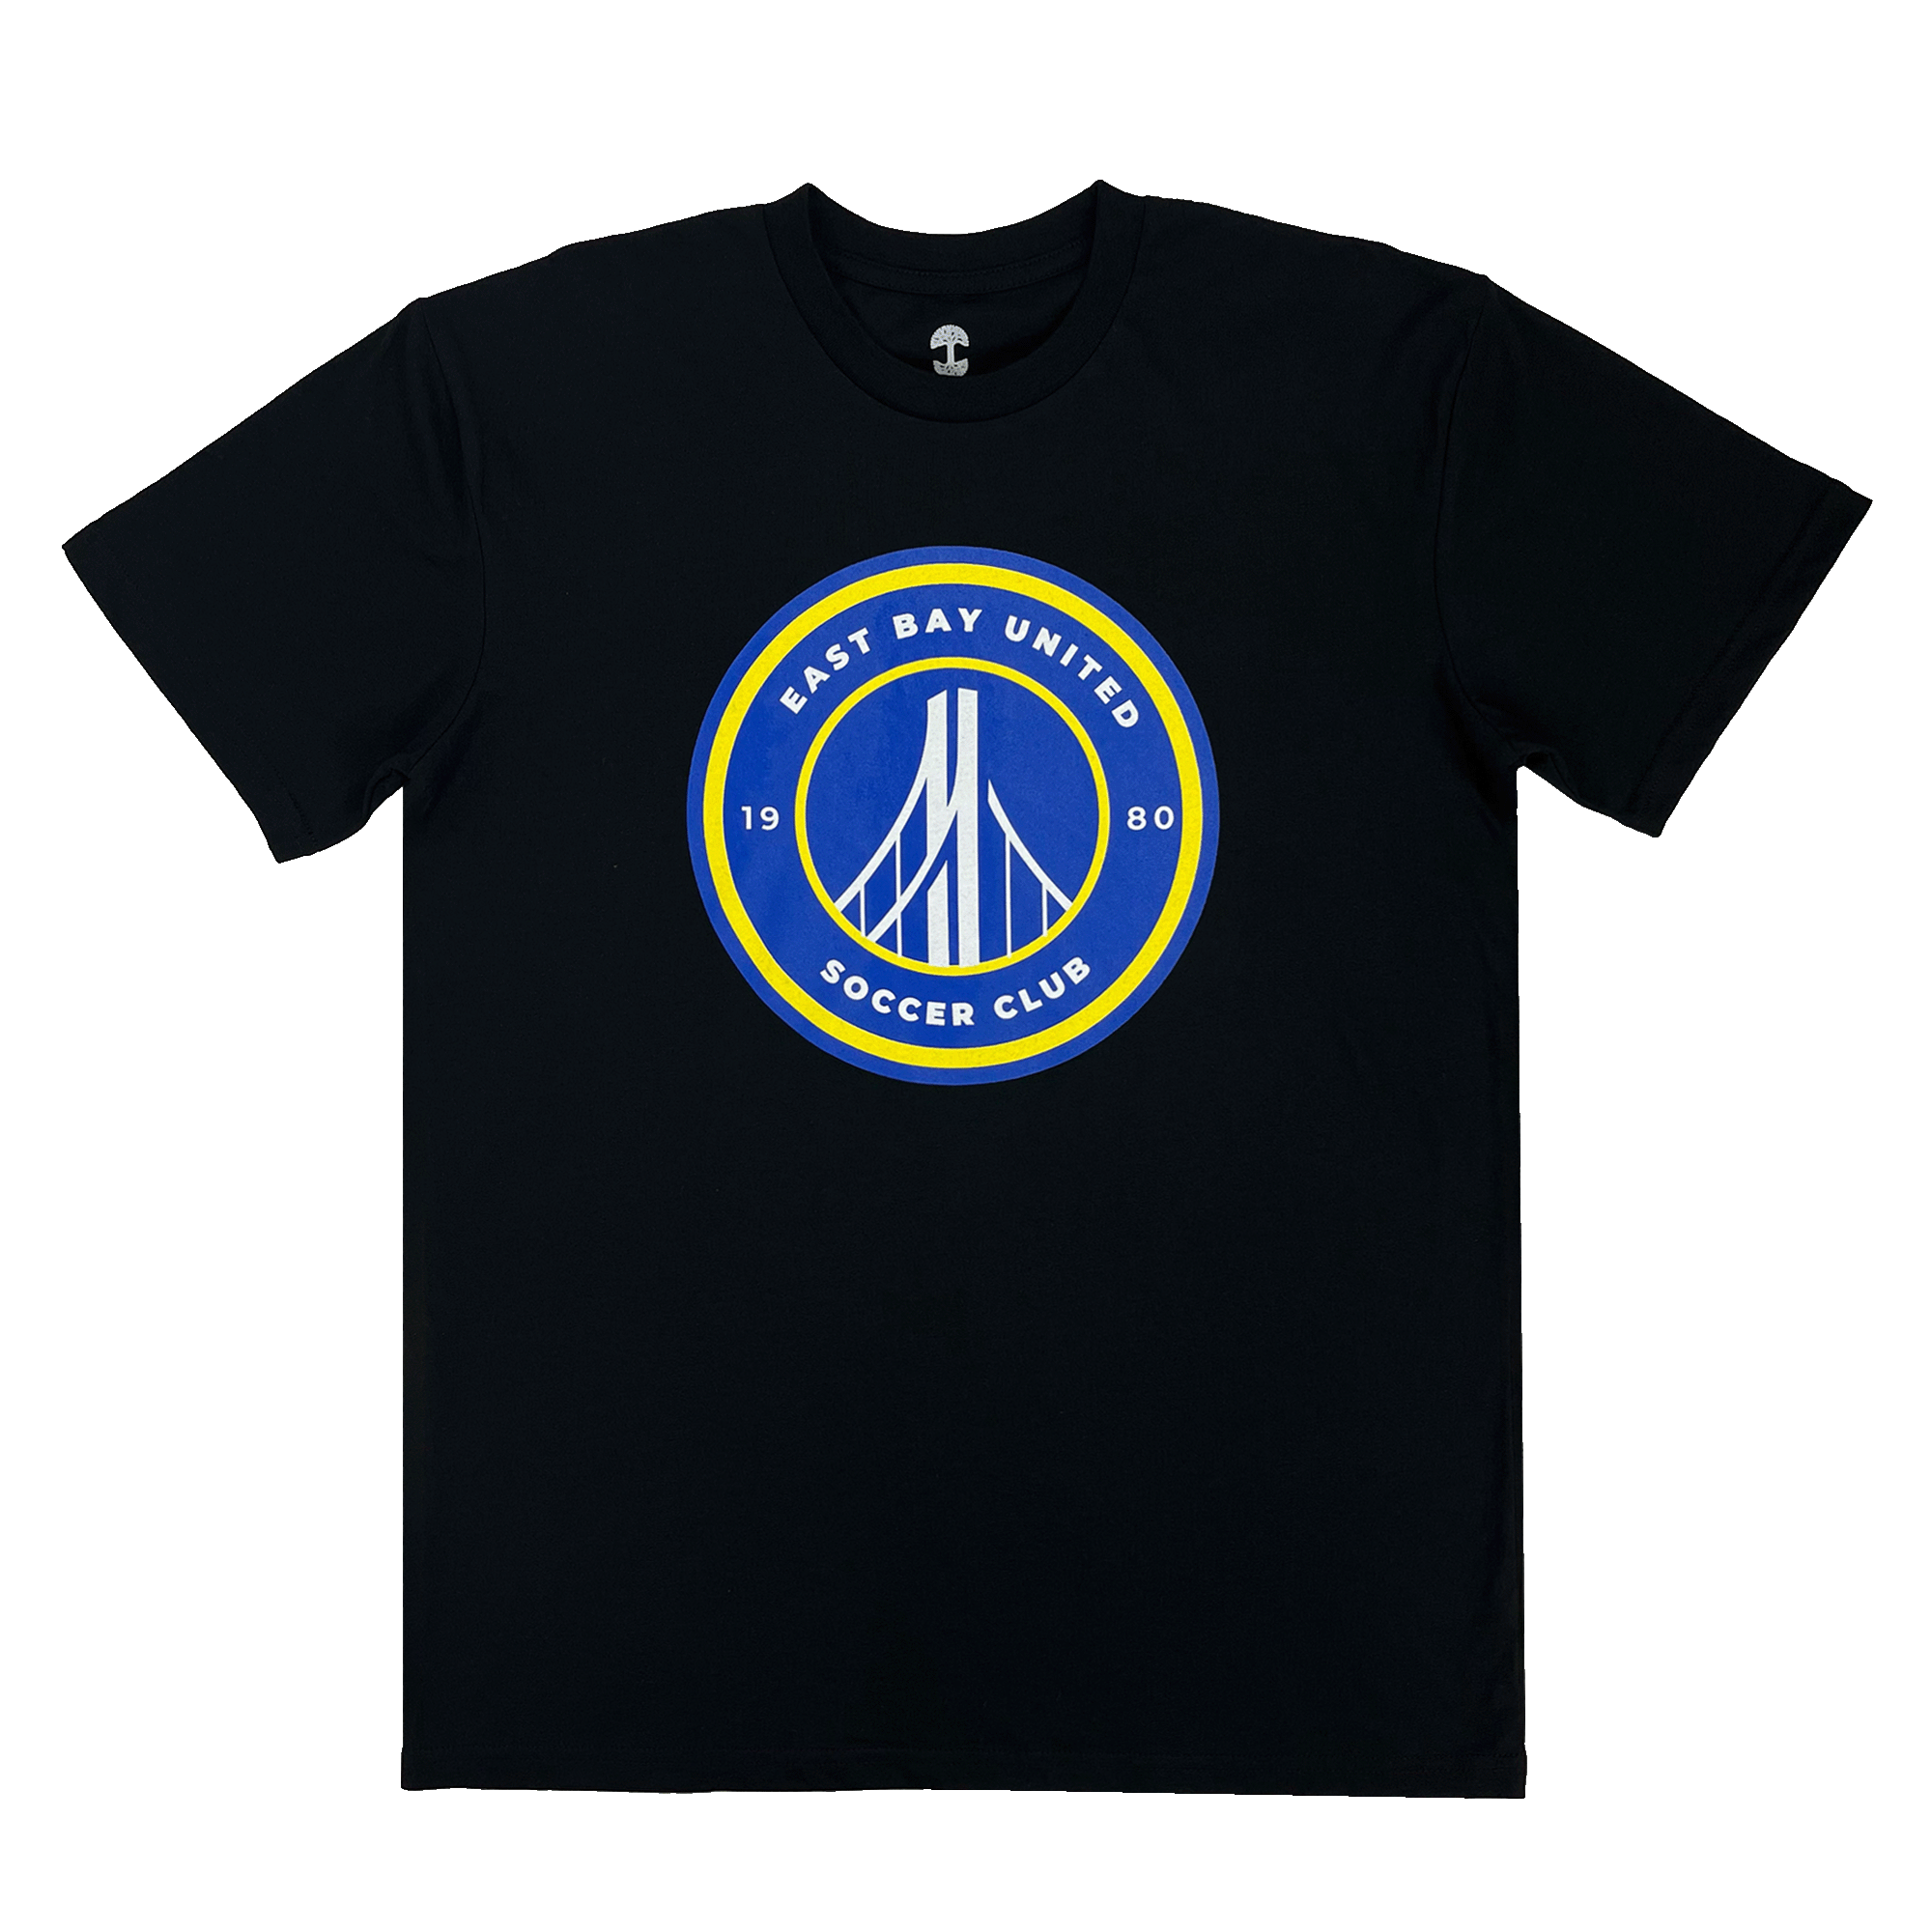 Front view of a black t-shirt with round blue, white, and yellow East Bay United Soccer Club 1980 logo on the front chest.